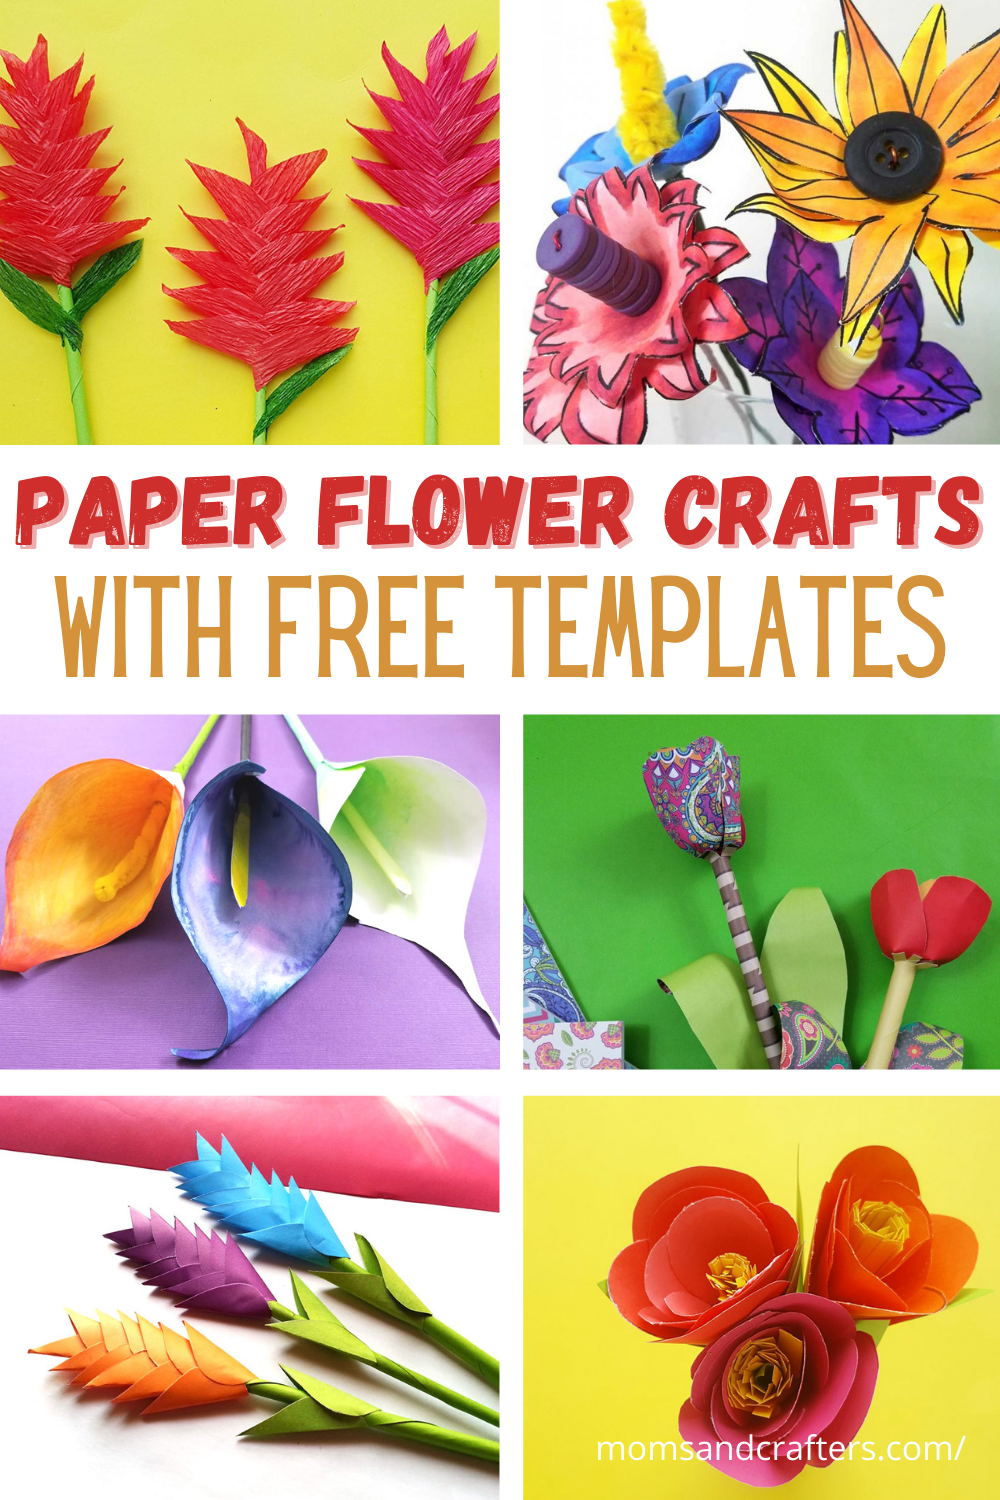 Click for these beautiful paper flower templaets